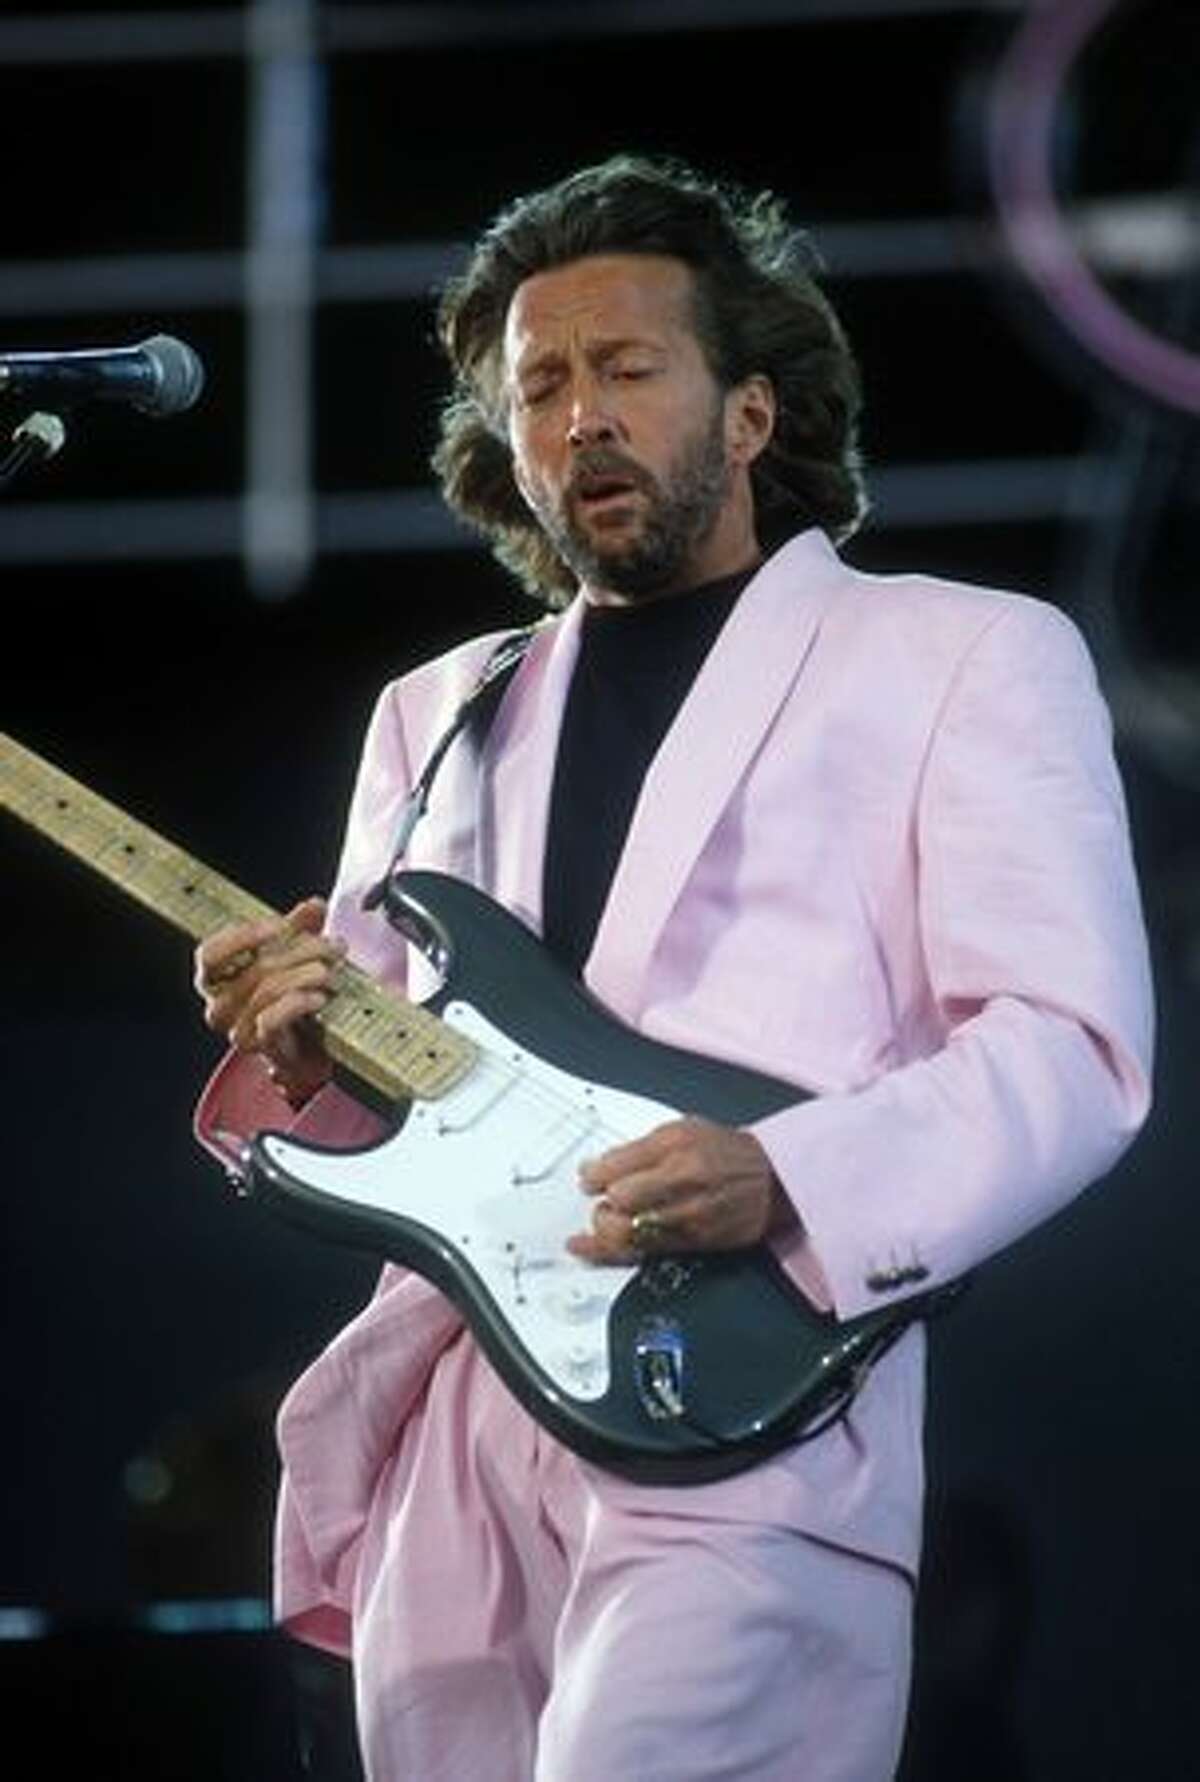 Eric Clapton performing onstage in Knebworth, England, 1990. (Photo by Frank Micelotta/ImageDirect)